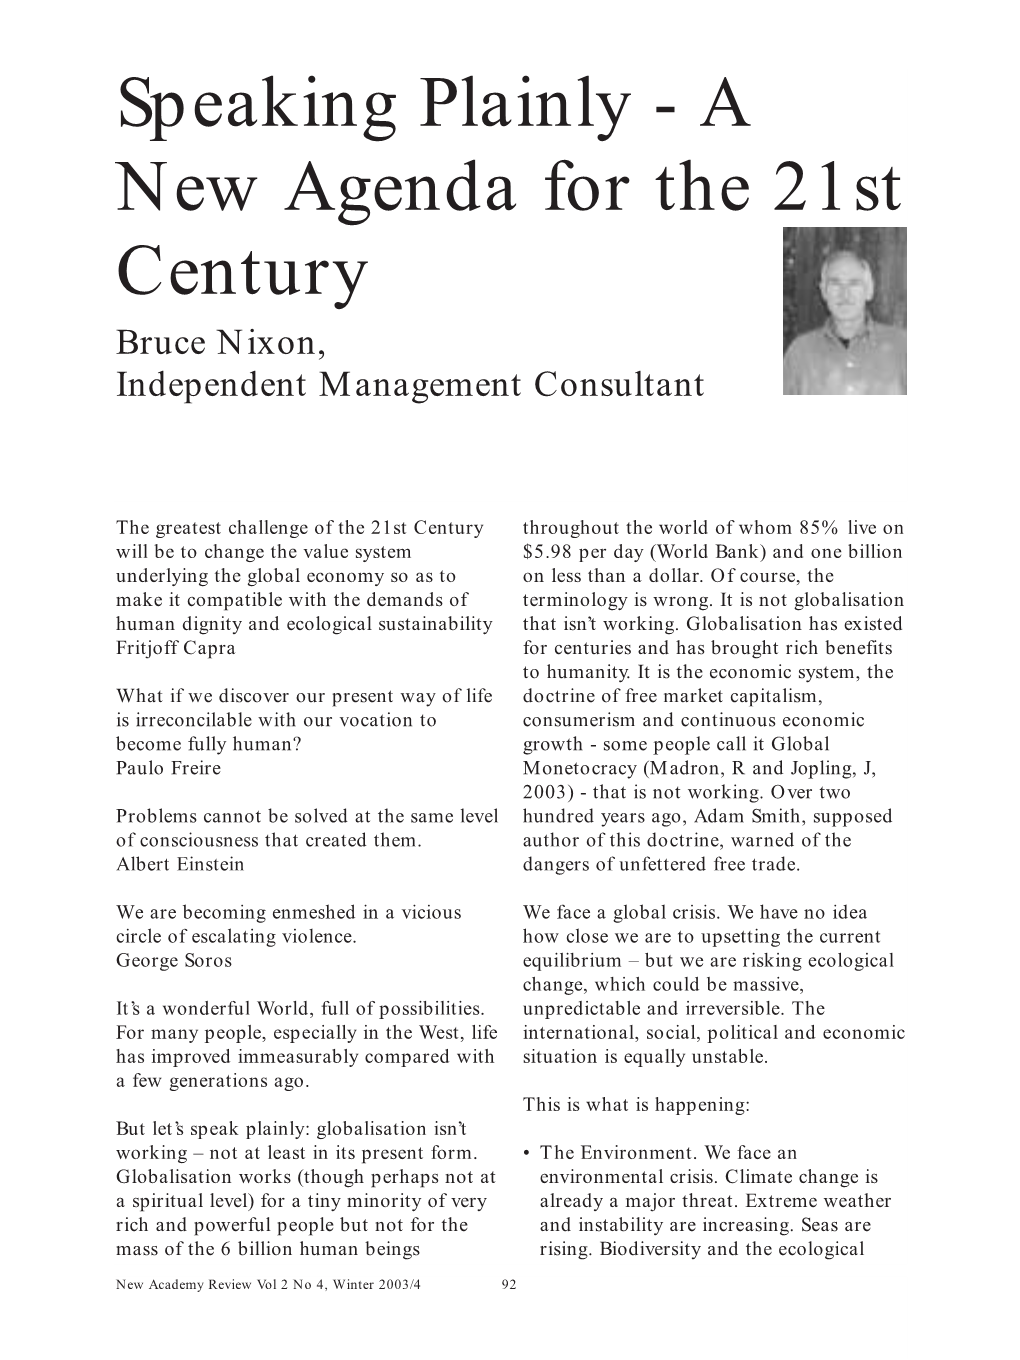 Speaking Plainly - a New Agenda for the 21St Century Bruce Nixon, Independent Management Consultant